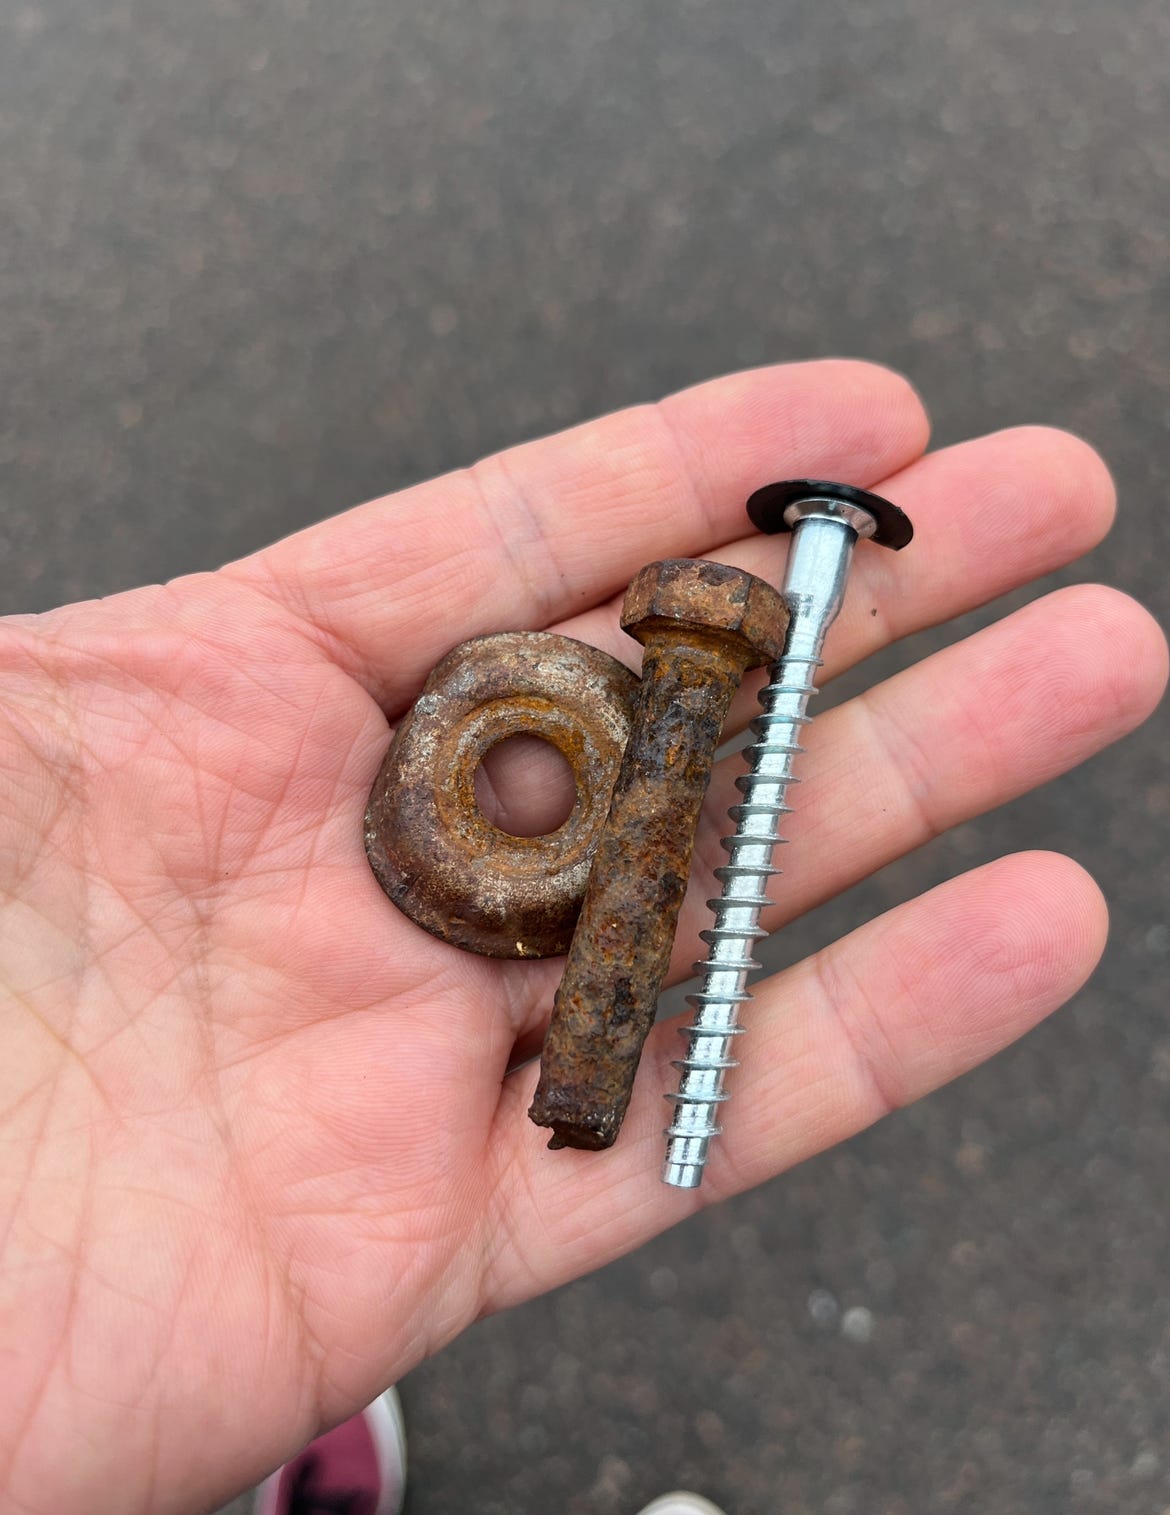 A couple of rusty bolts in my hand